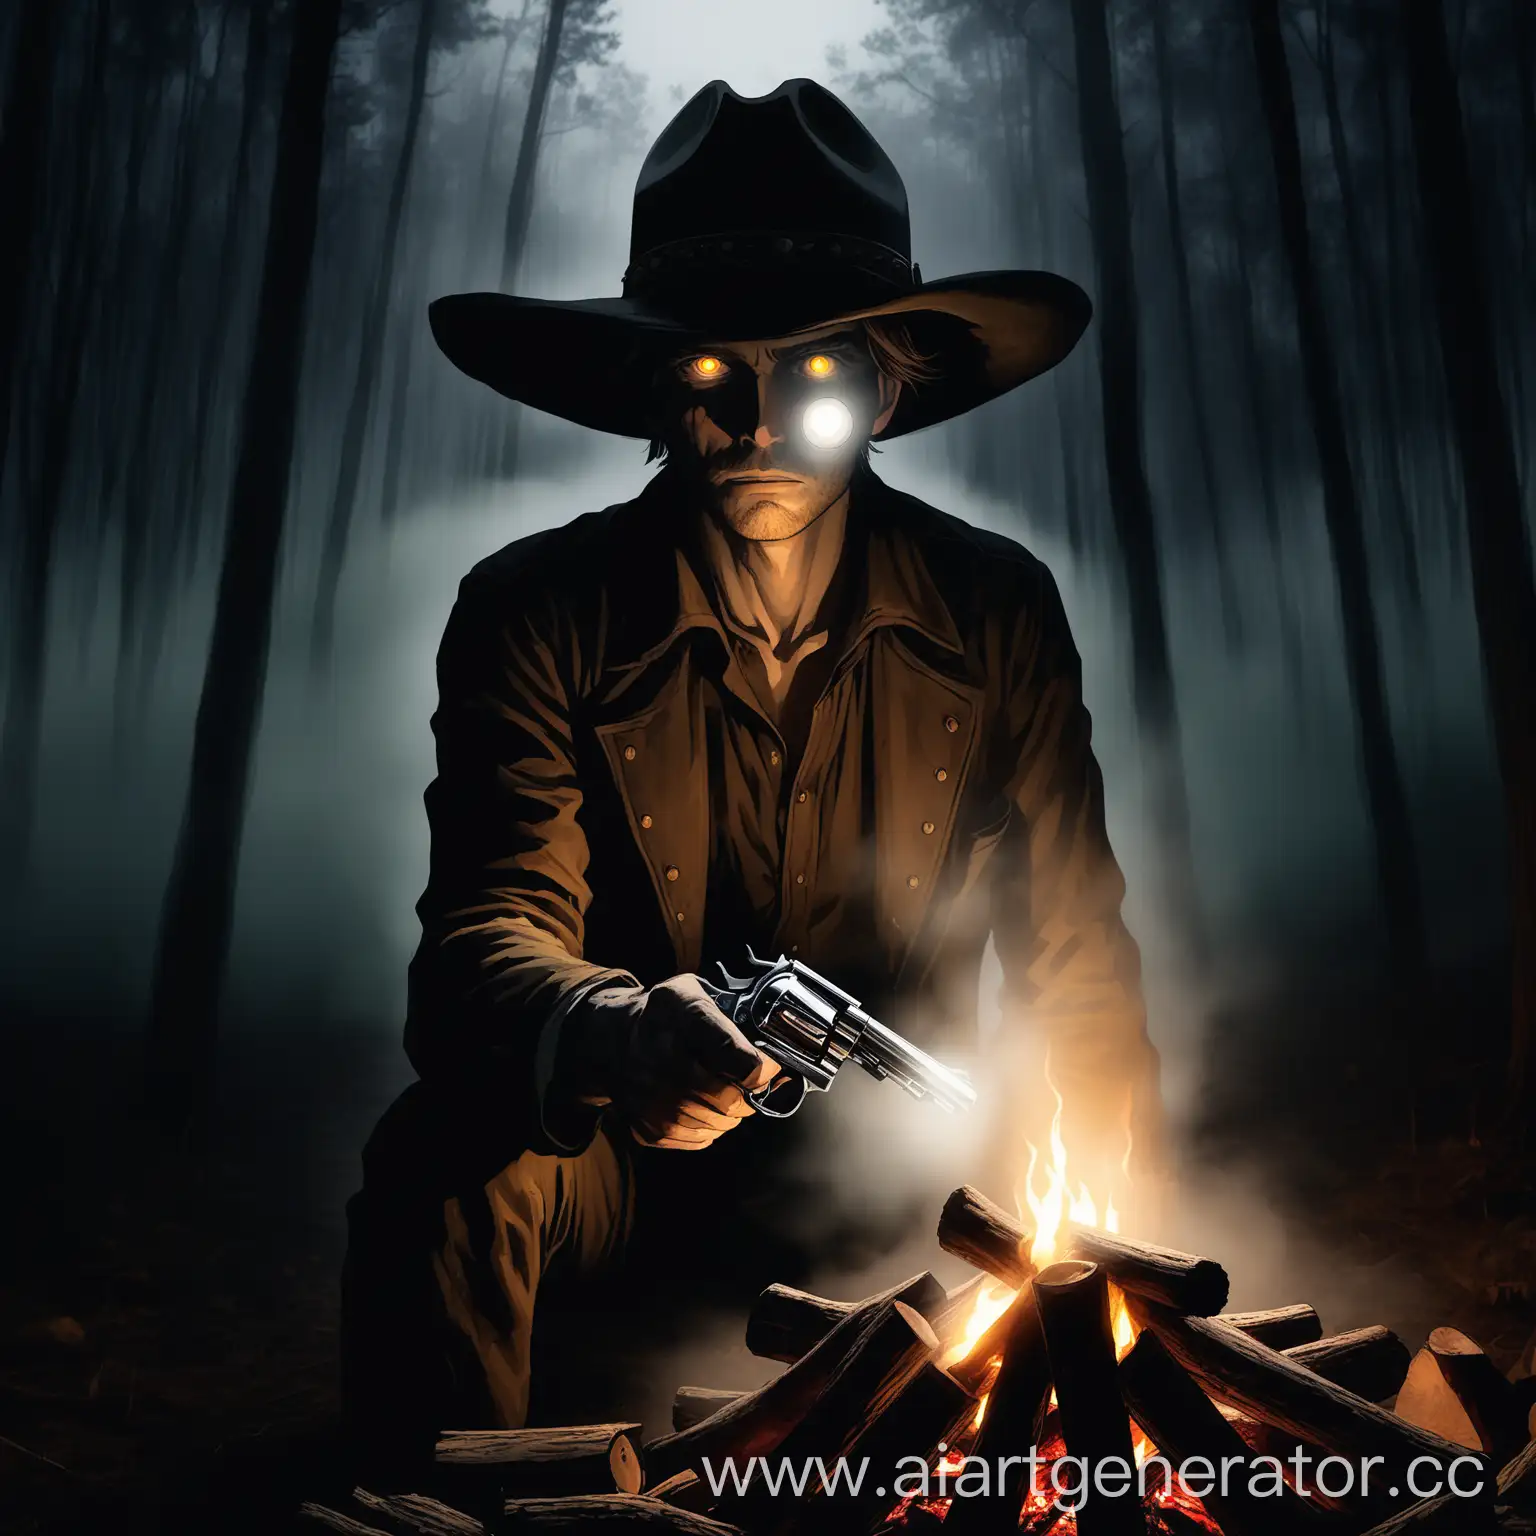 Mysterious-Cowboy-with-Shining-Eyes-and-Revolver-in-Dark-Forest